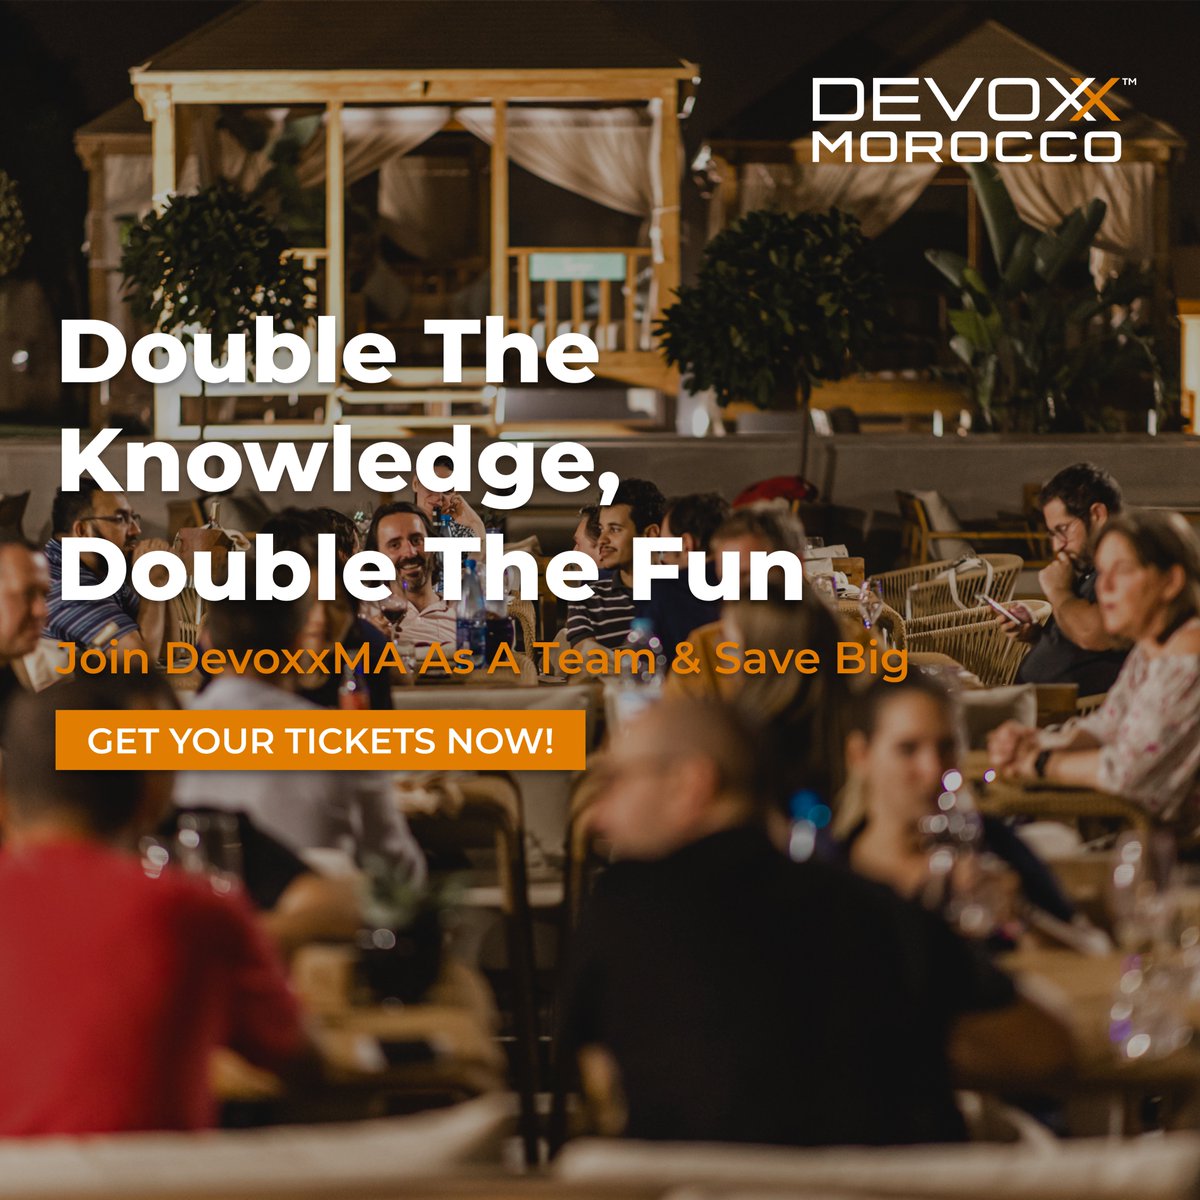 Join Devoxx Morocco as a Team! 🌟

Learn, network, and innovate together at the largest developer conference in Marrakesh. Don’t miss out on this incredible opportunity to grow and achieve more as a team.

👉 Reach out NOW: aloha@devoxx.ma
#DevoxxMA